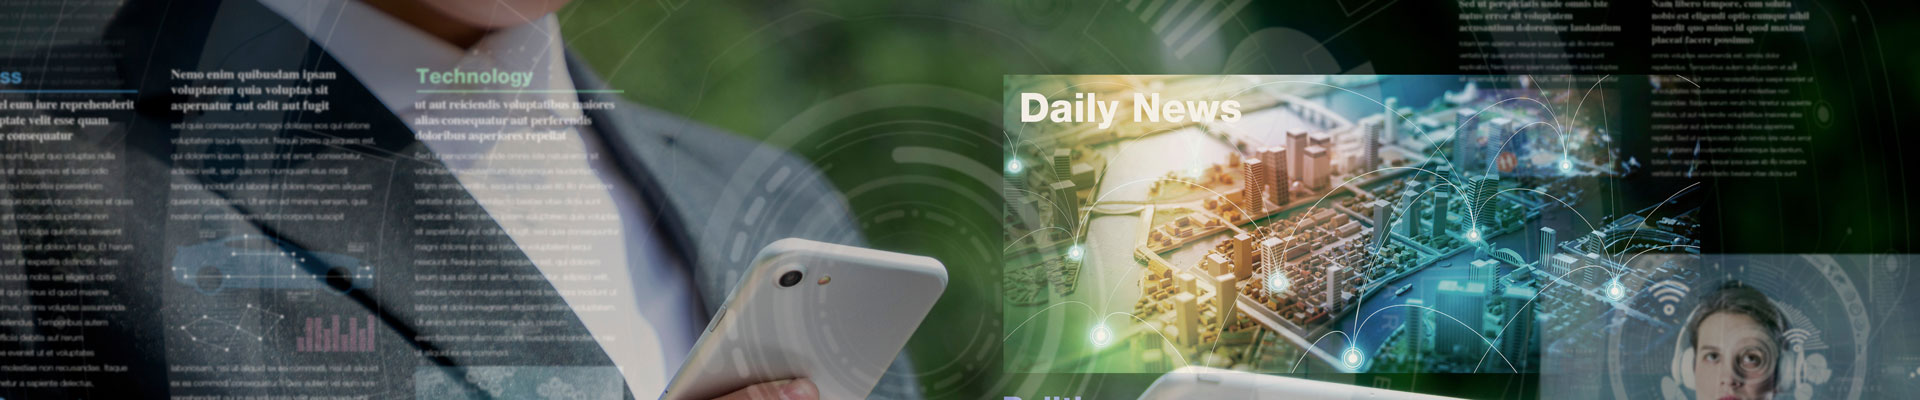 A person holding a cellphone and ipad with digital news clips overlaid across the image.